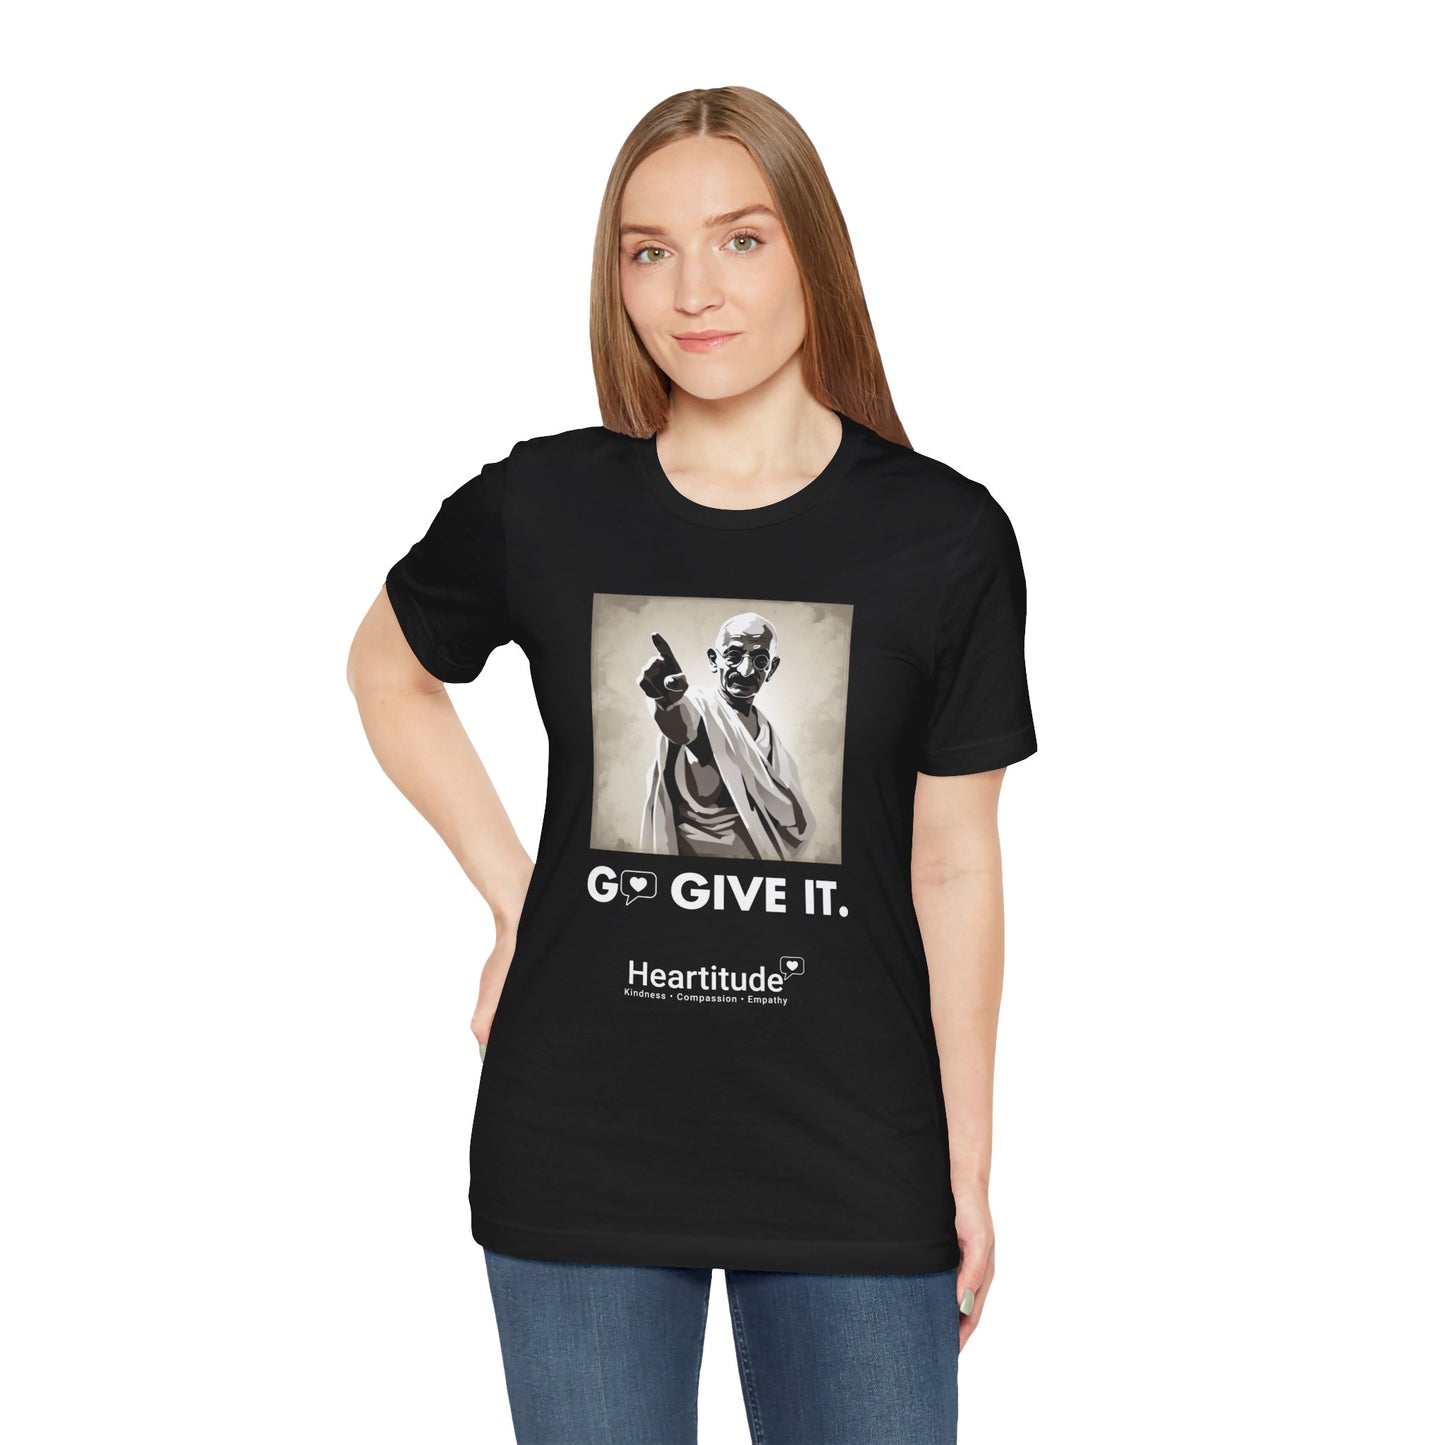 Go Give It with Gandhi Tee (50% to charity)